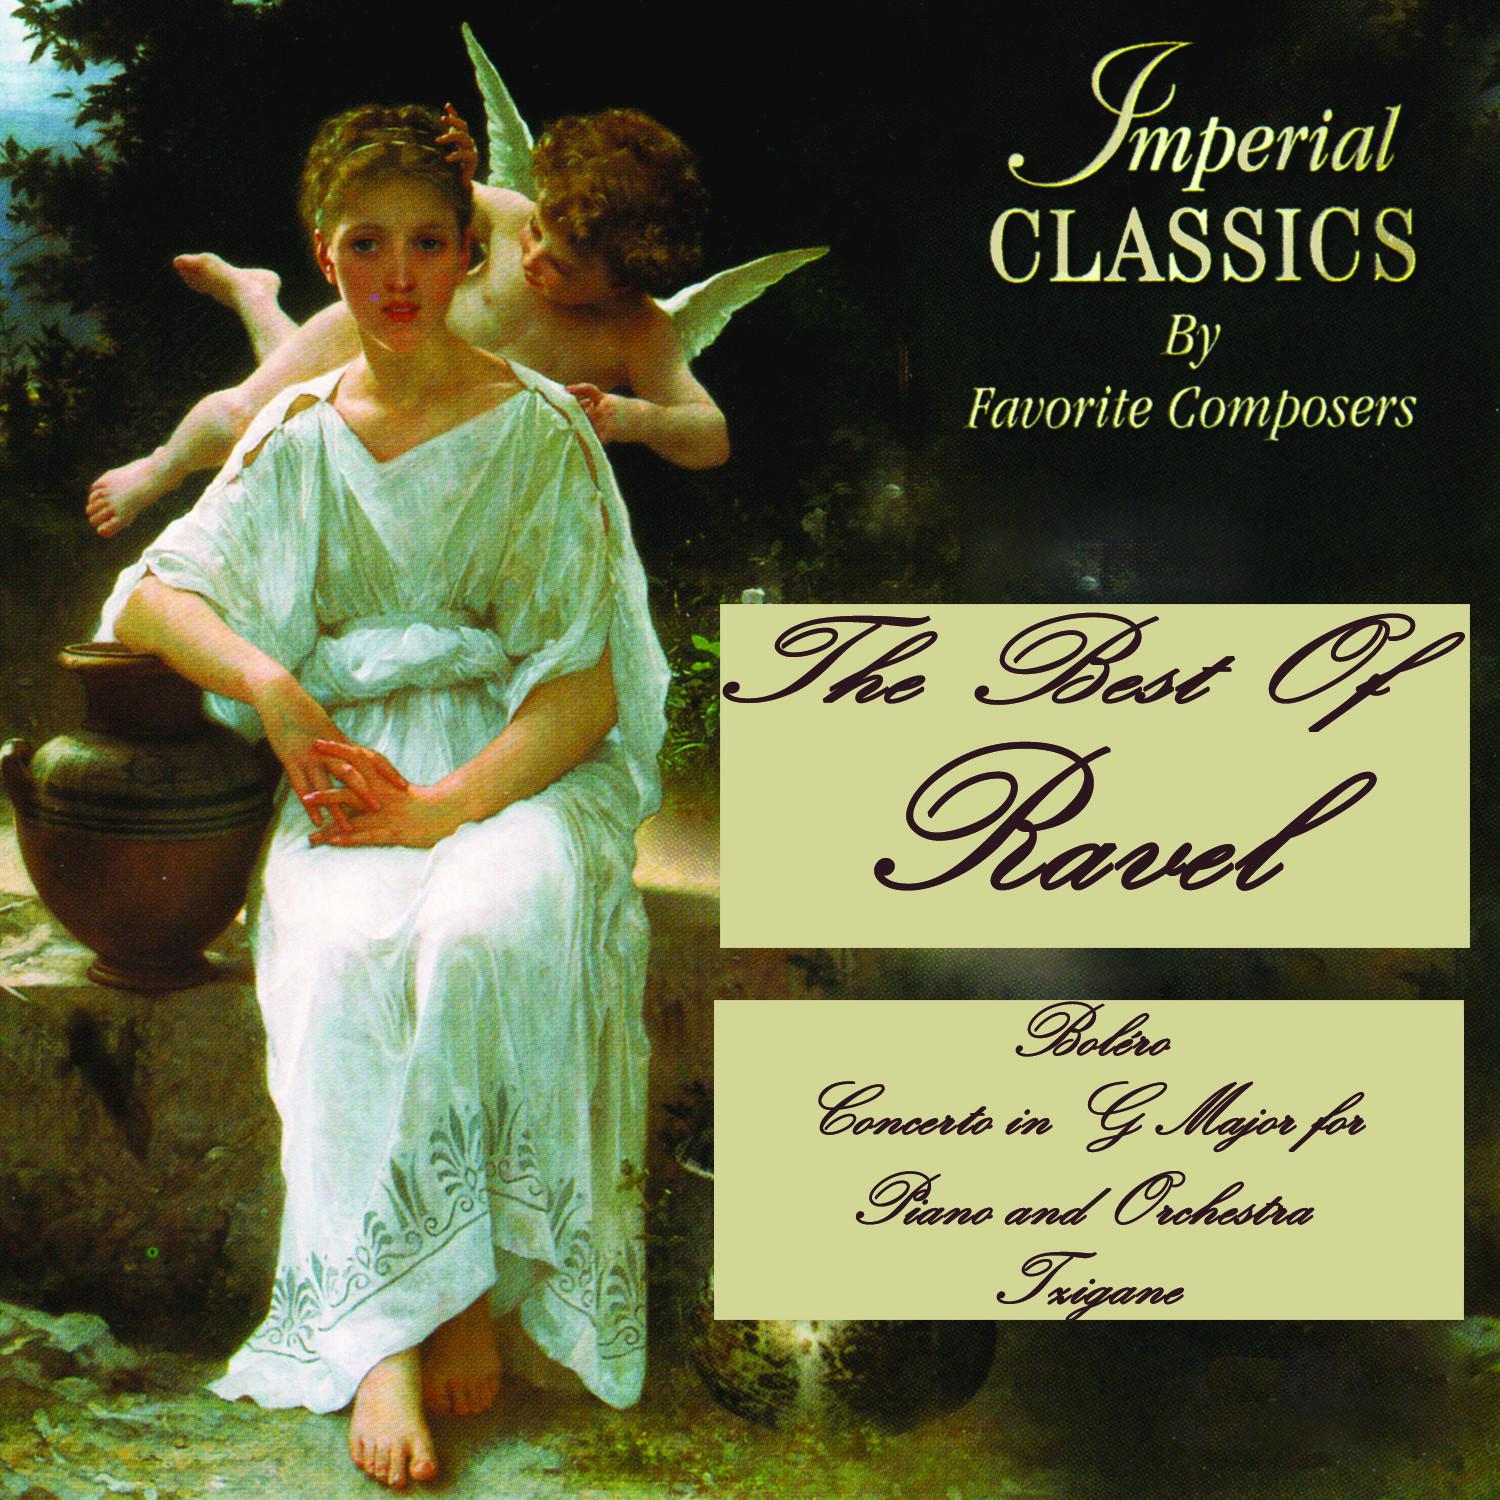 Imperial Classics: The Best Of Ravel